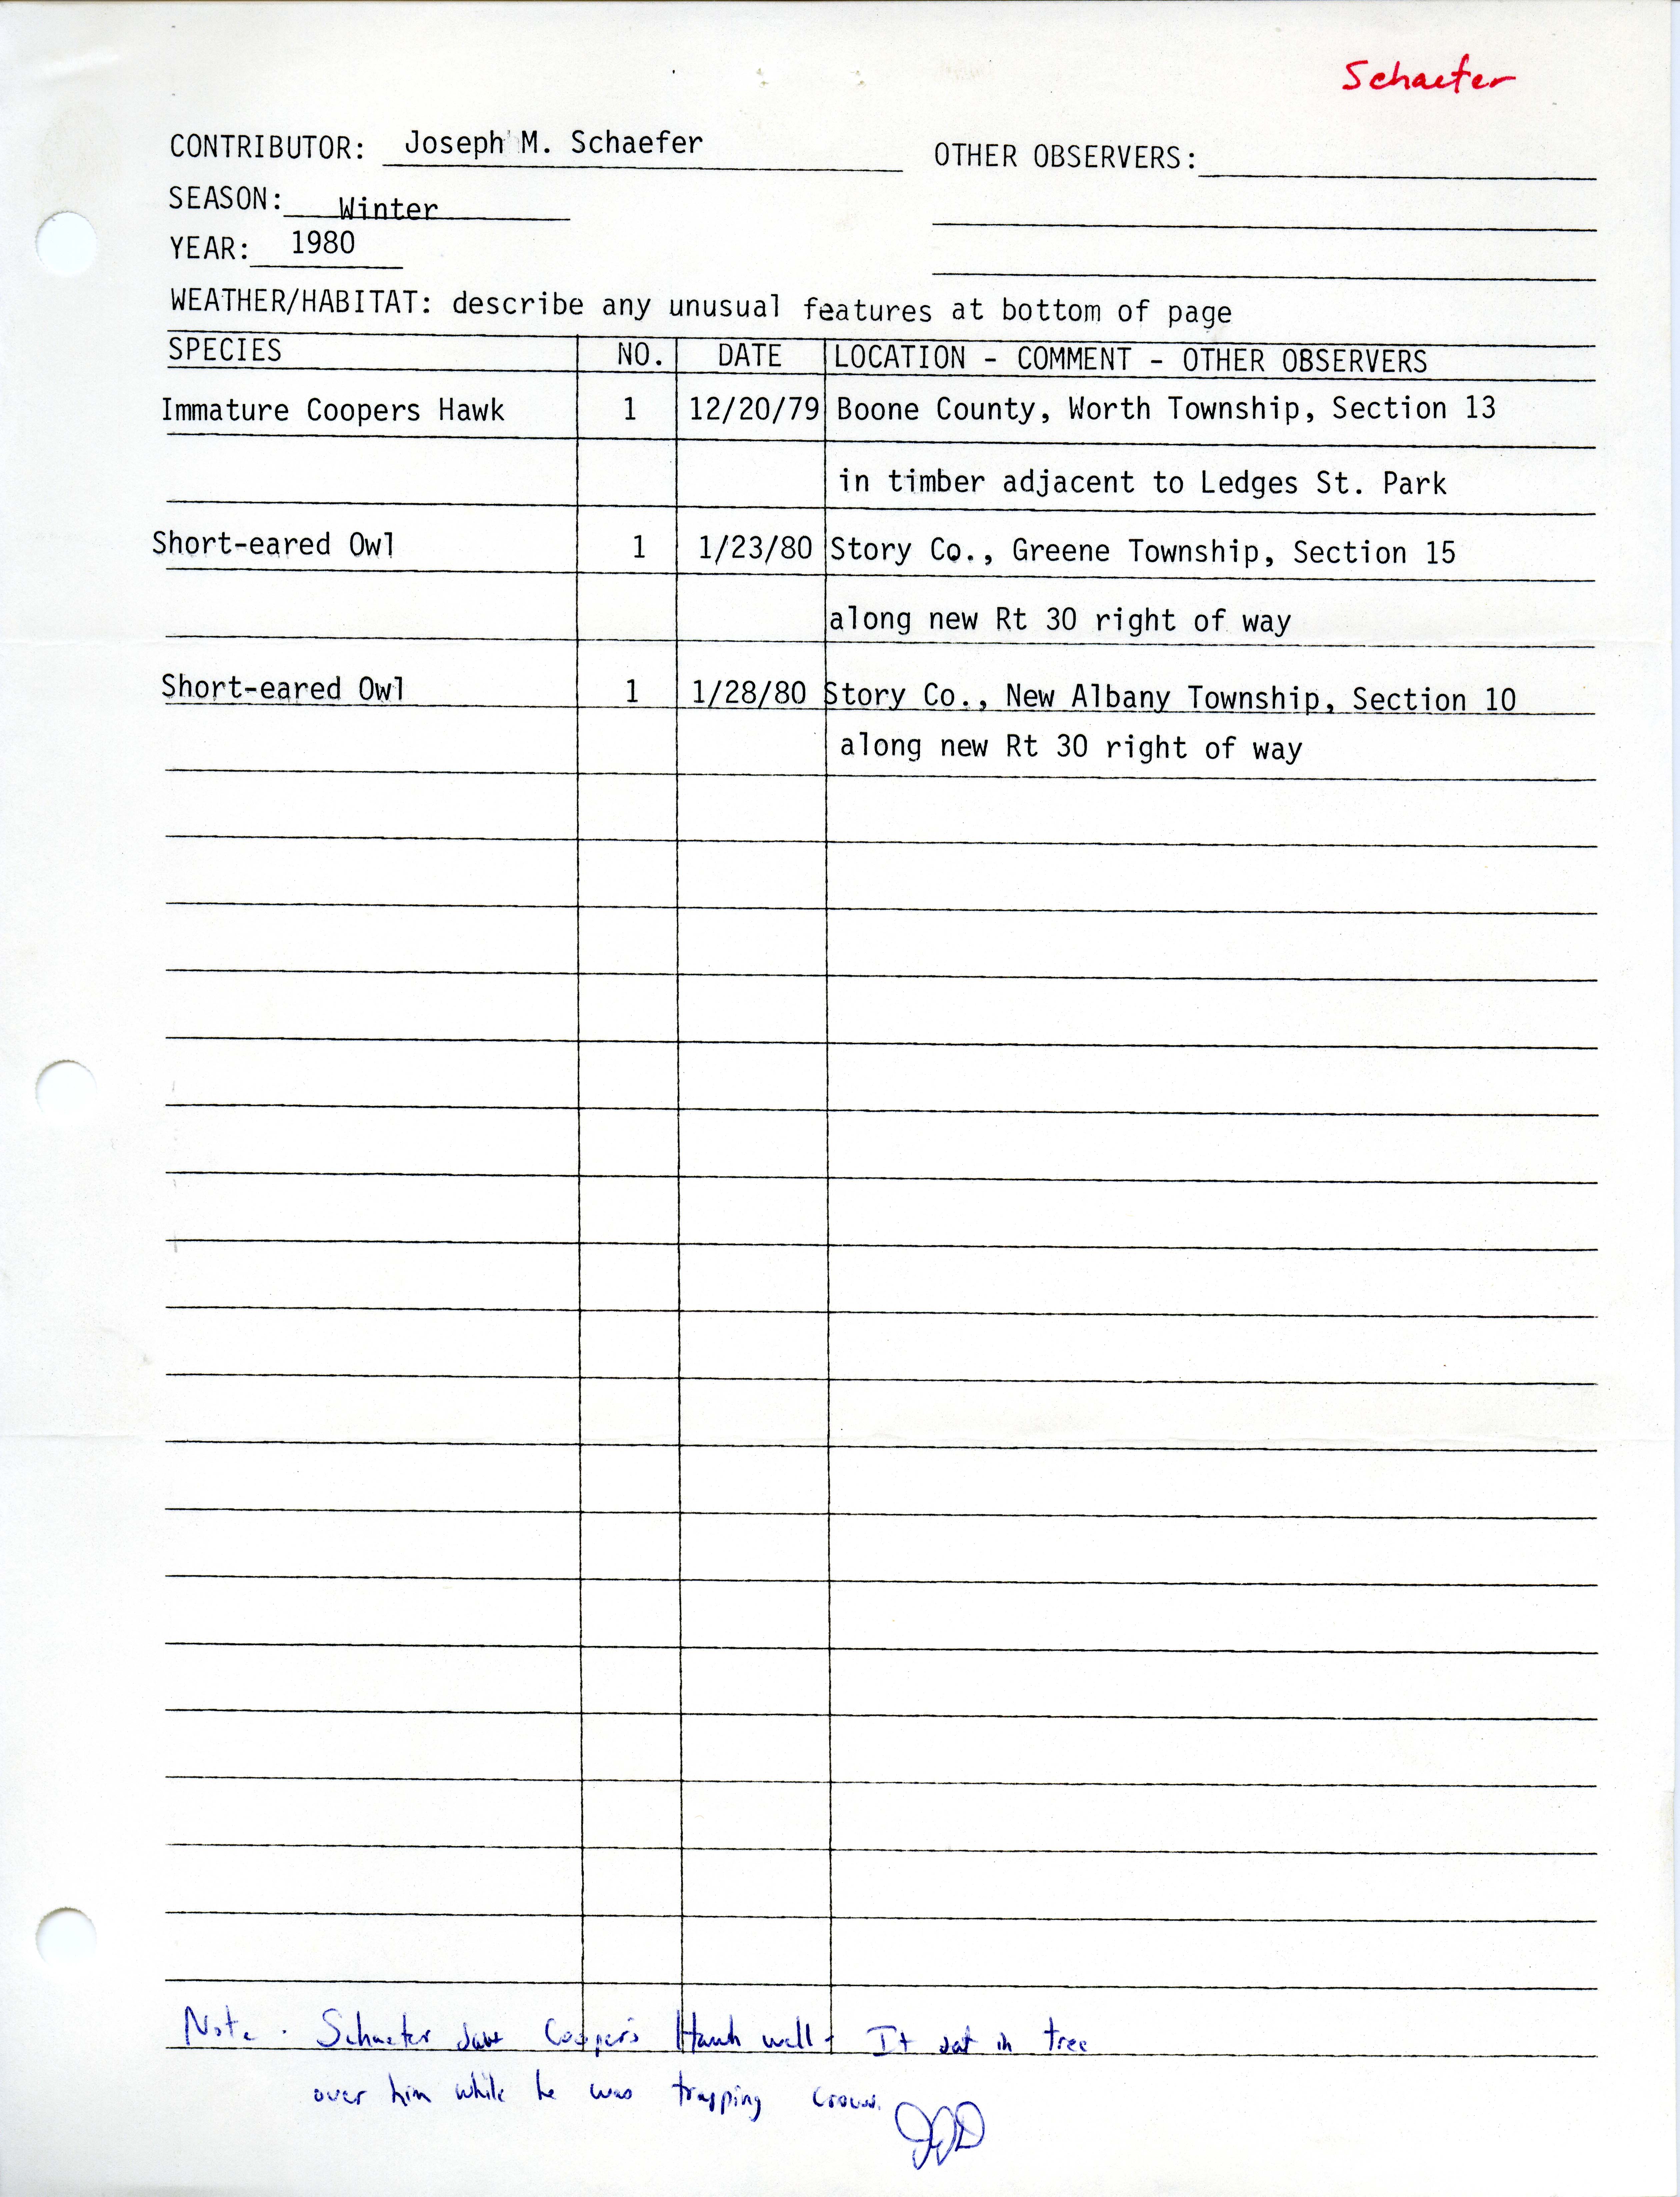 Field notes contributed by Joseph M. Schaefer, winter 1979-1980 